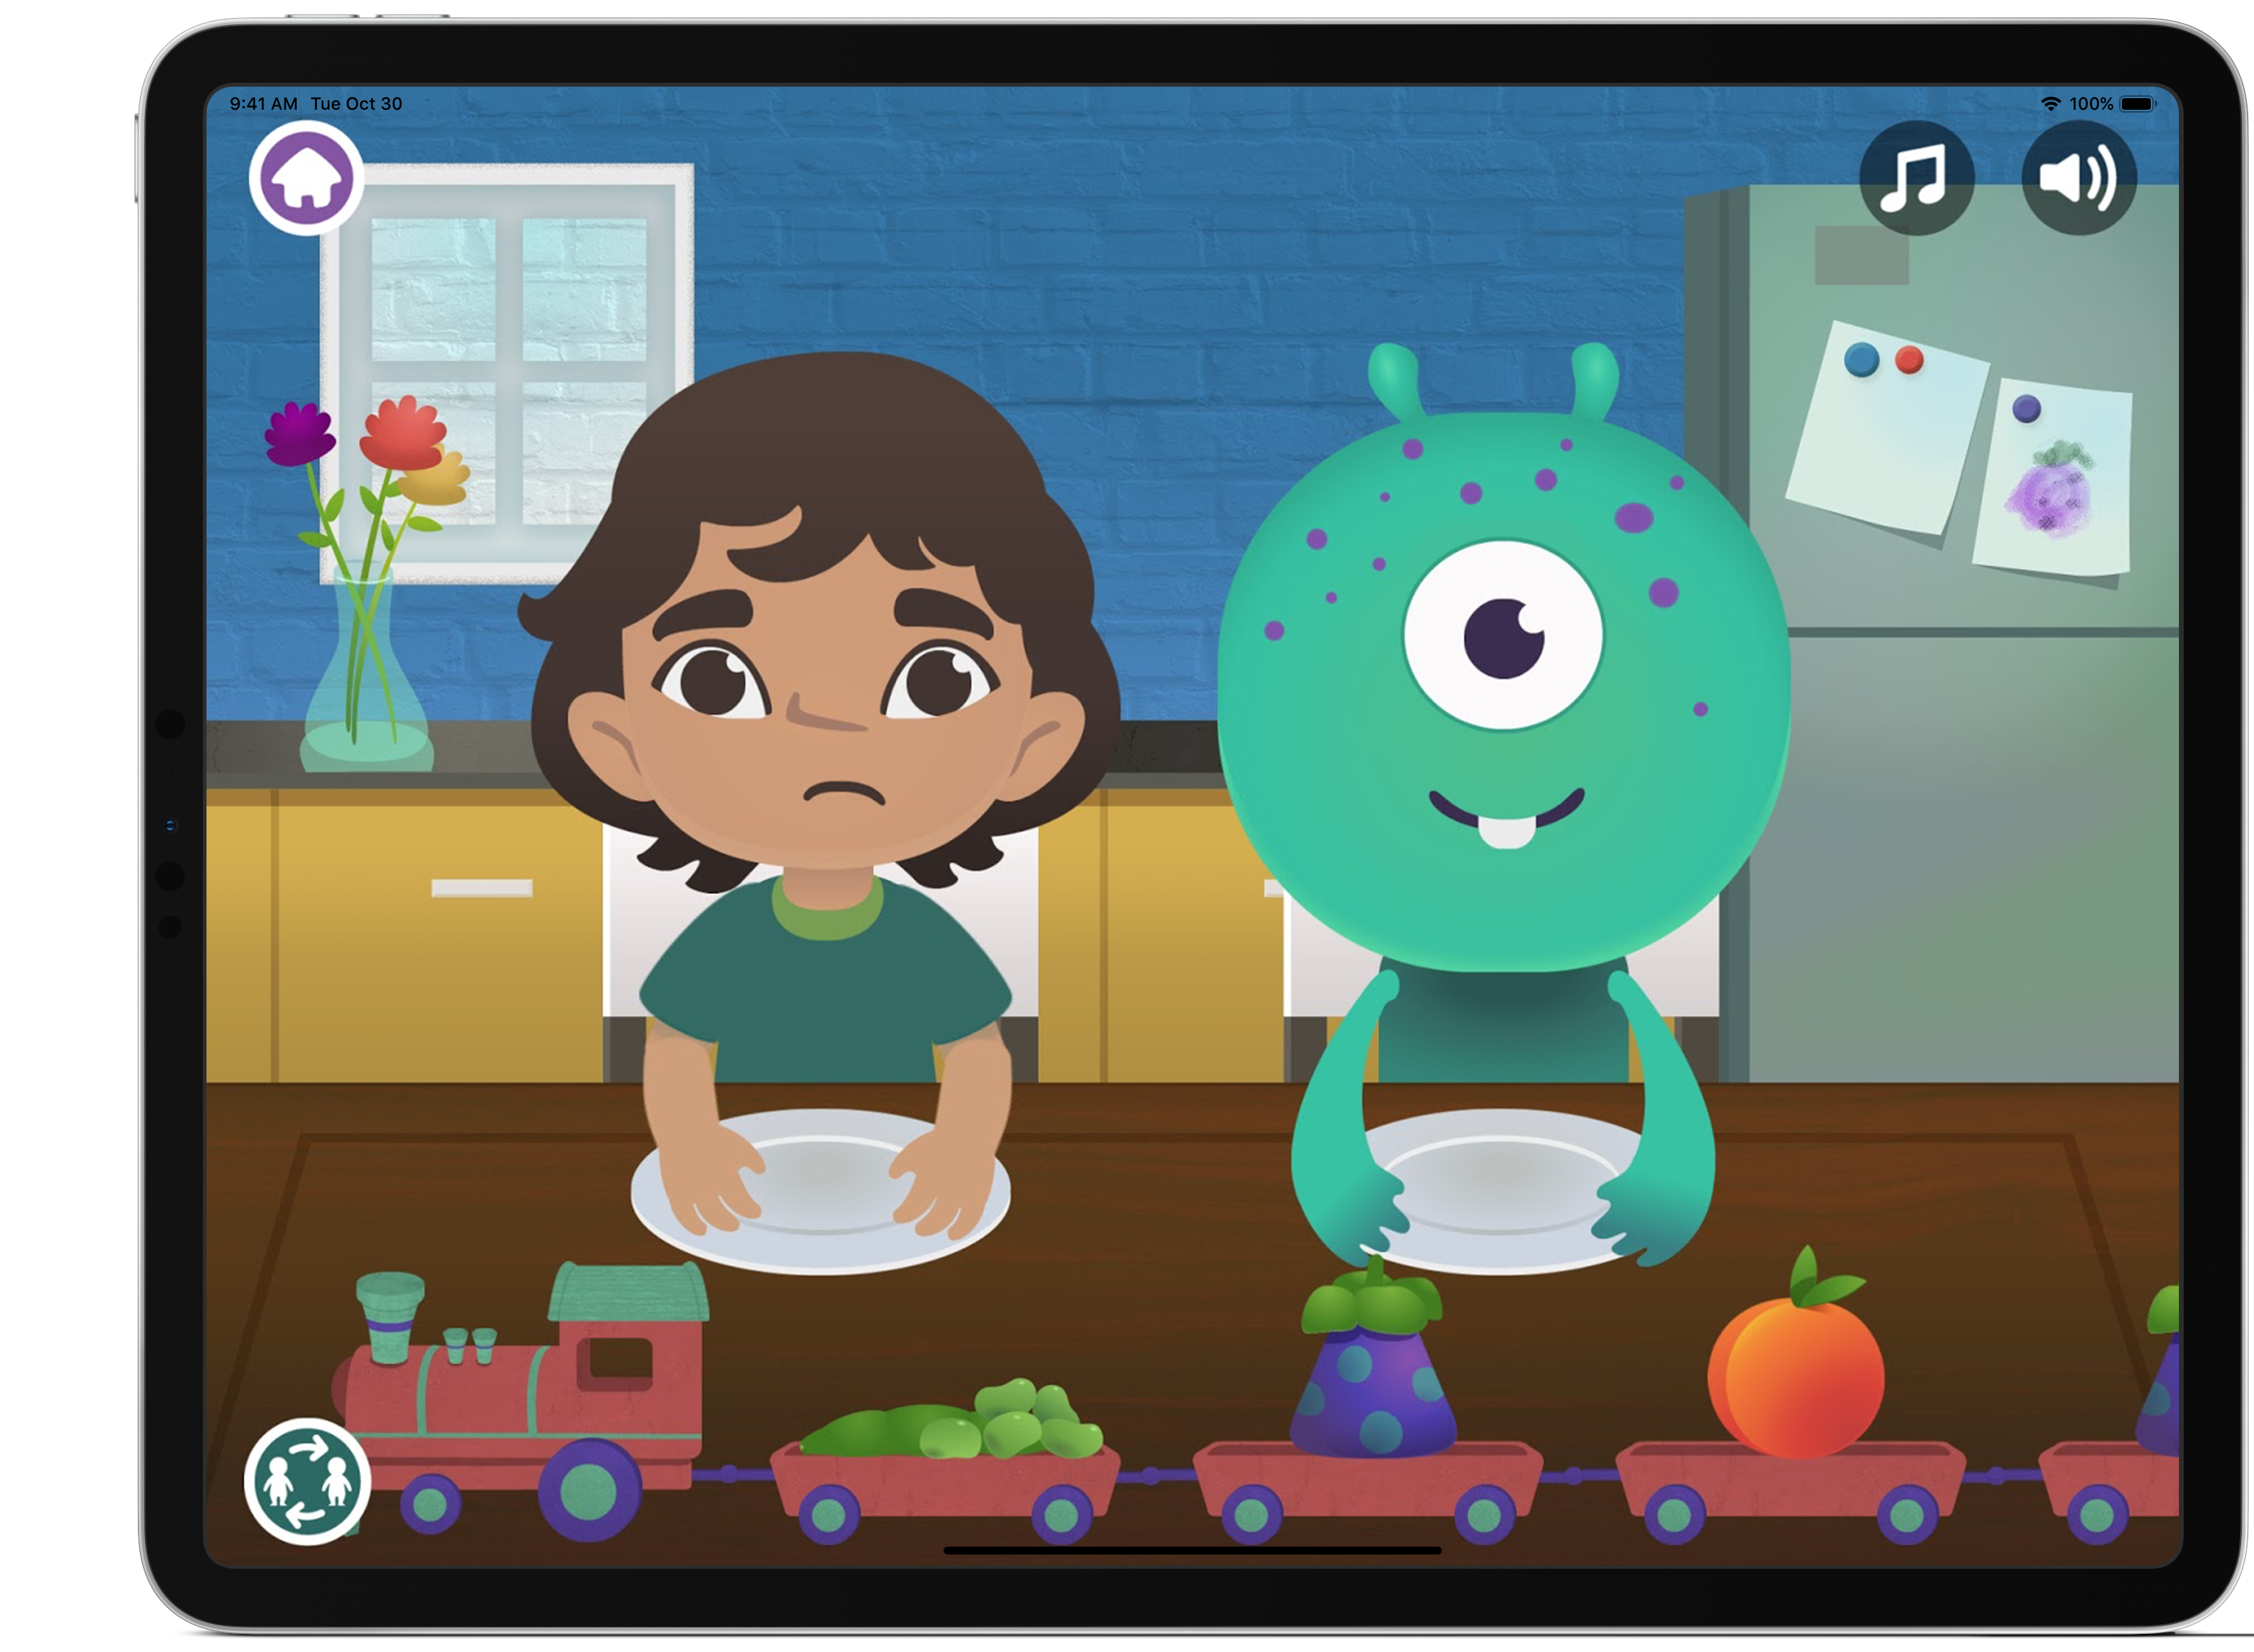 Tasting Party Express - two characters, unhappy boy and happy creature, sitting in kitchen with plate and different kinds of fruits